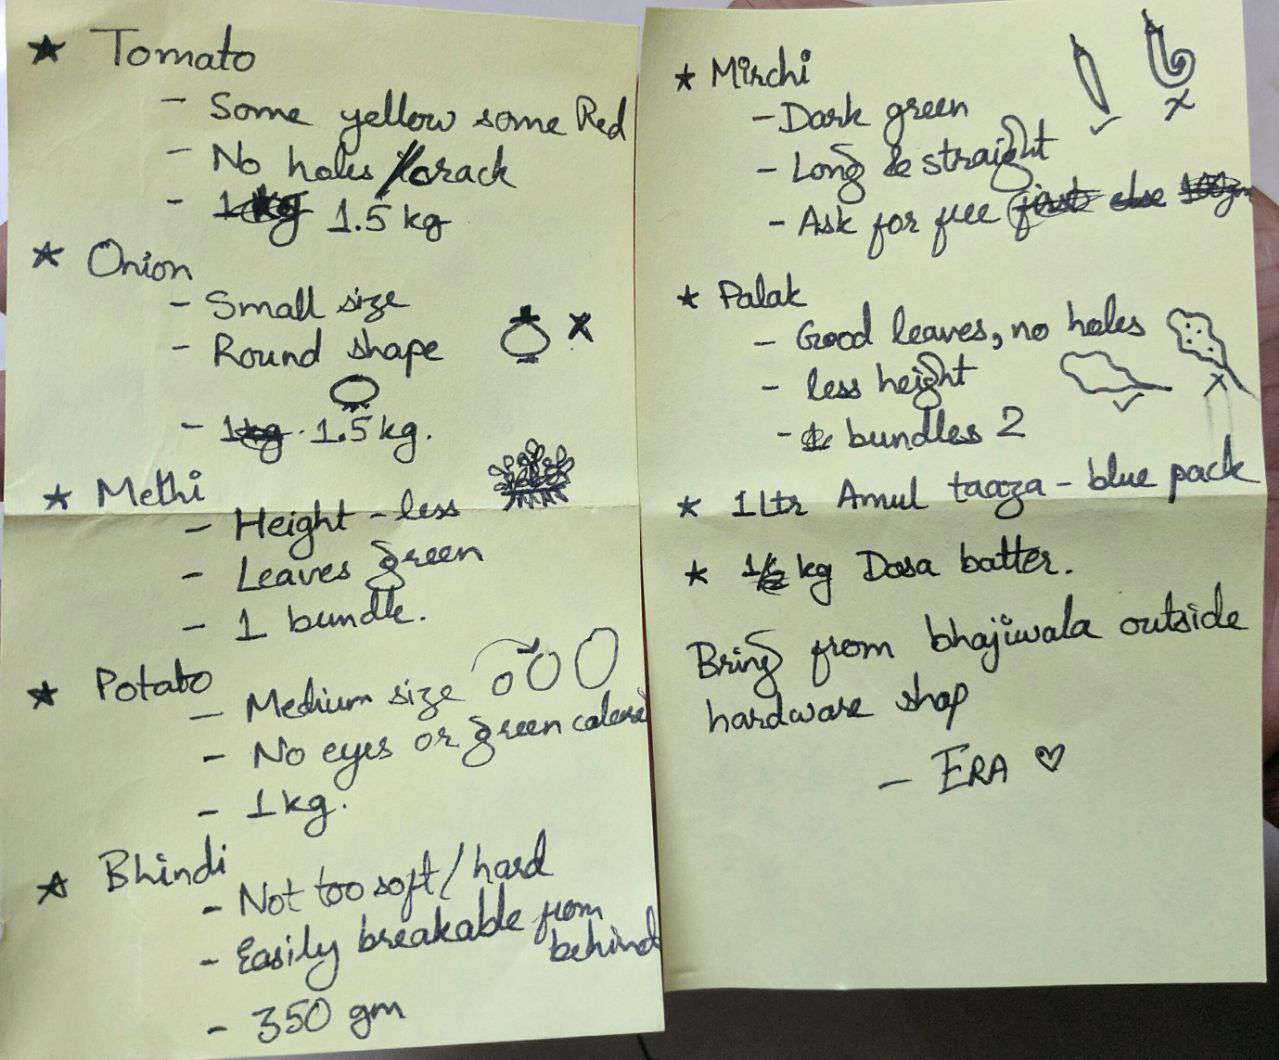 Check Out the Crazy-Detailed Shopping List This Wife Made For Her Husband | Parents